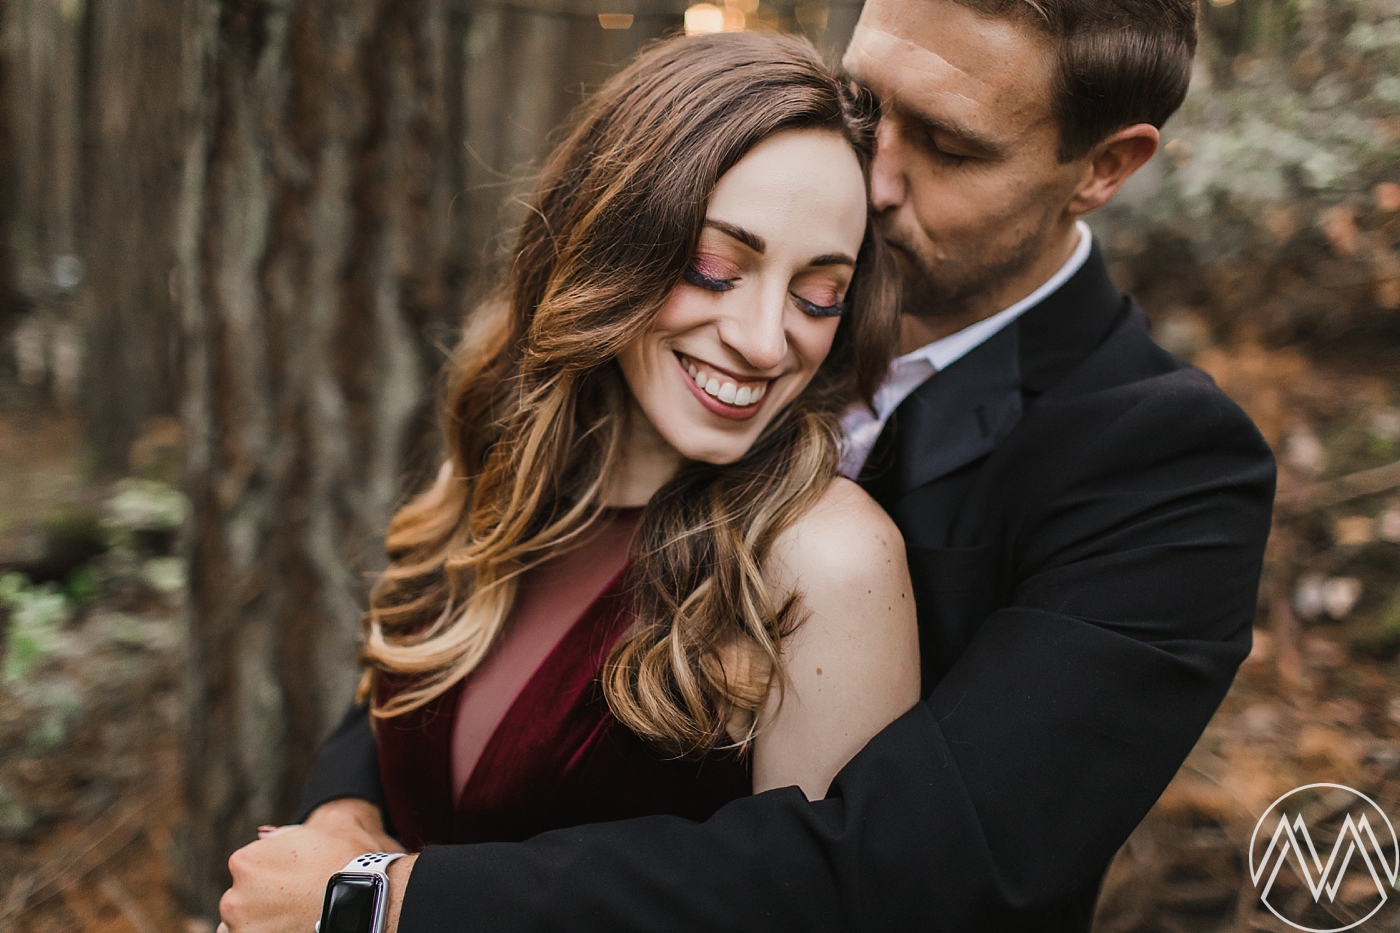 Couples engagement photos at Point Defiance Park in Tacoma, WA. Photographed by Tacoma Wedding and Elopement Photographer, Megan Montalvo Photography. 